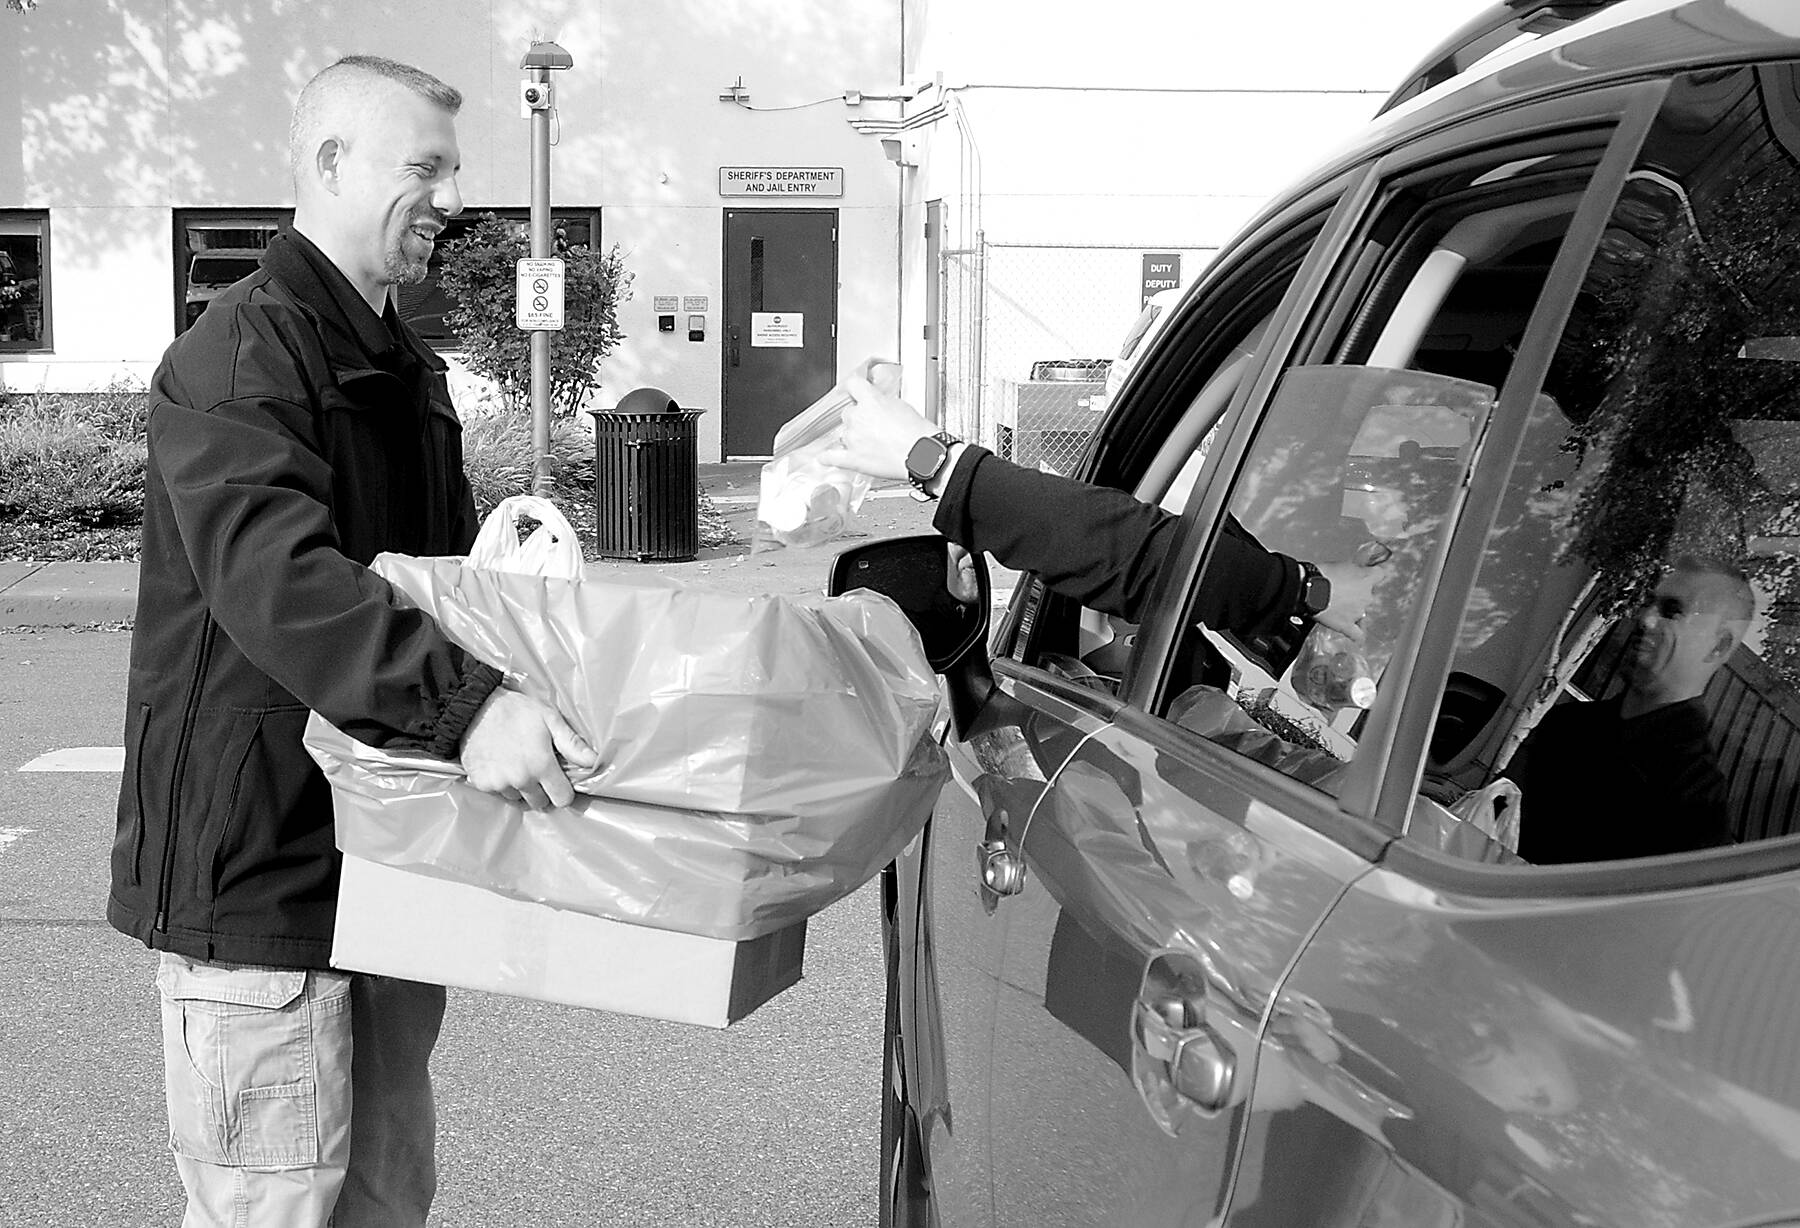 Inspector Josh Ley of the Clallam County Sheriff’s Office accepts a package of medications from a motorist at the Clallam County Courthouse in Port Angeles during National Prescription Drug Take Back Day on Saturday. The nationwide event was developed to provide a safe method of disposing of unwanted, uneeded or expired prescription medications and illicit drugs. (Keith Thorpe/Peninsula Daily News)